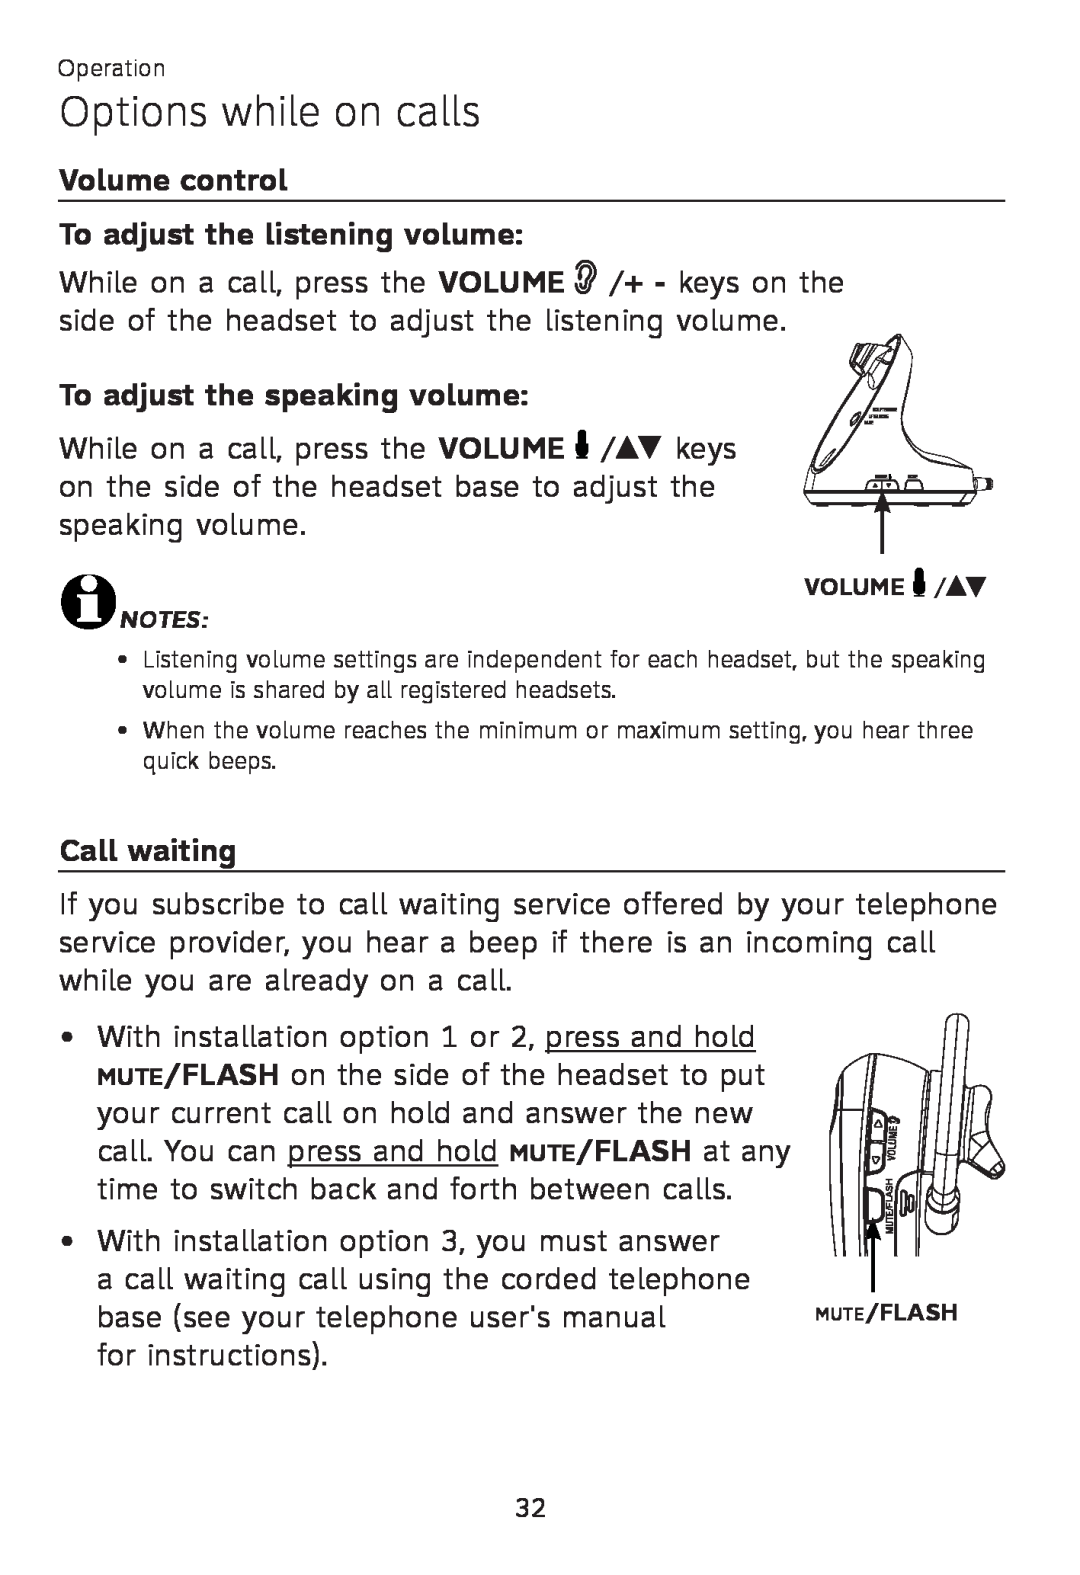 AT&T TL 7610 Options while on calls, Volume control To adjust the listening volume, To adjust the speaking volume 